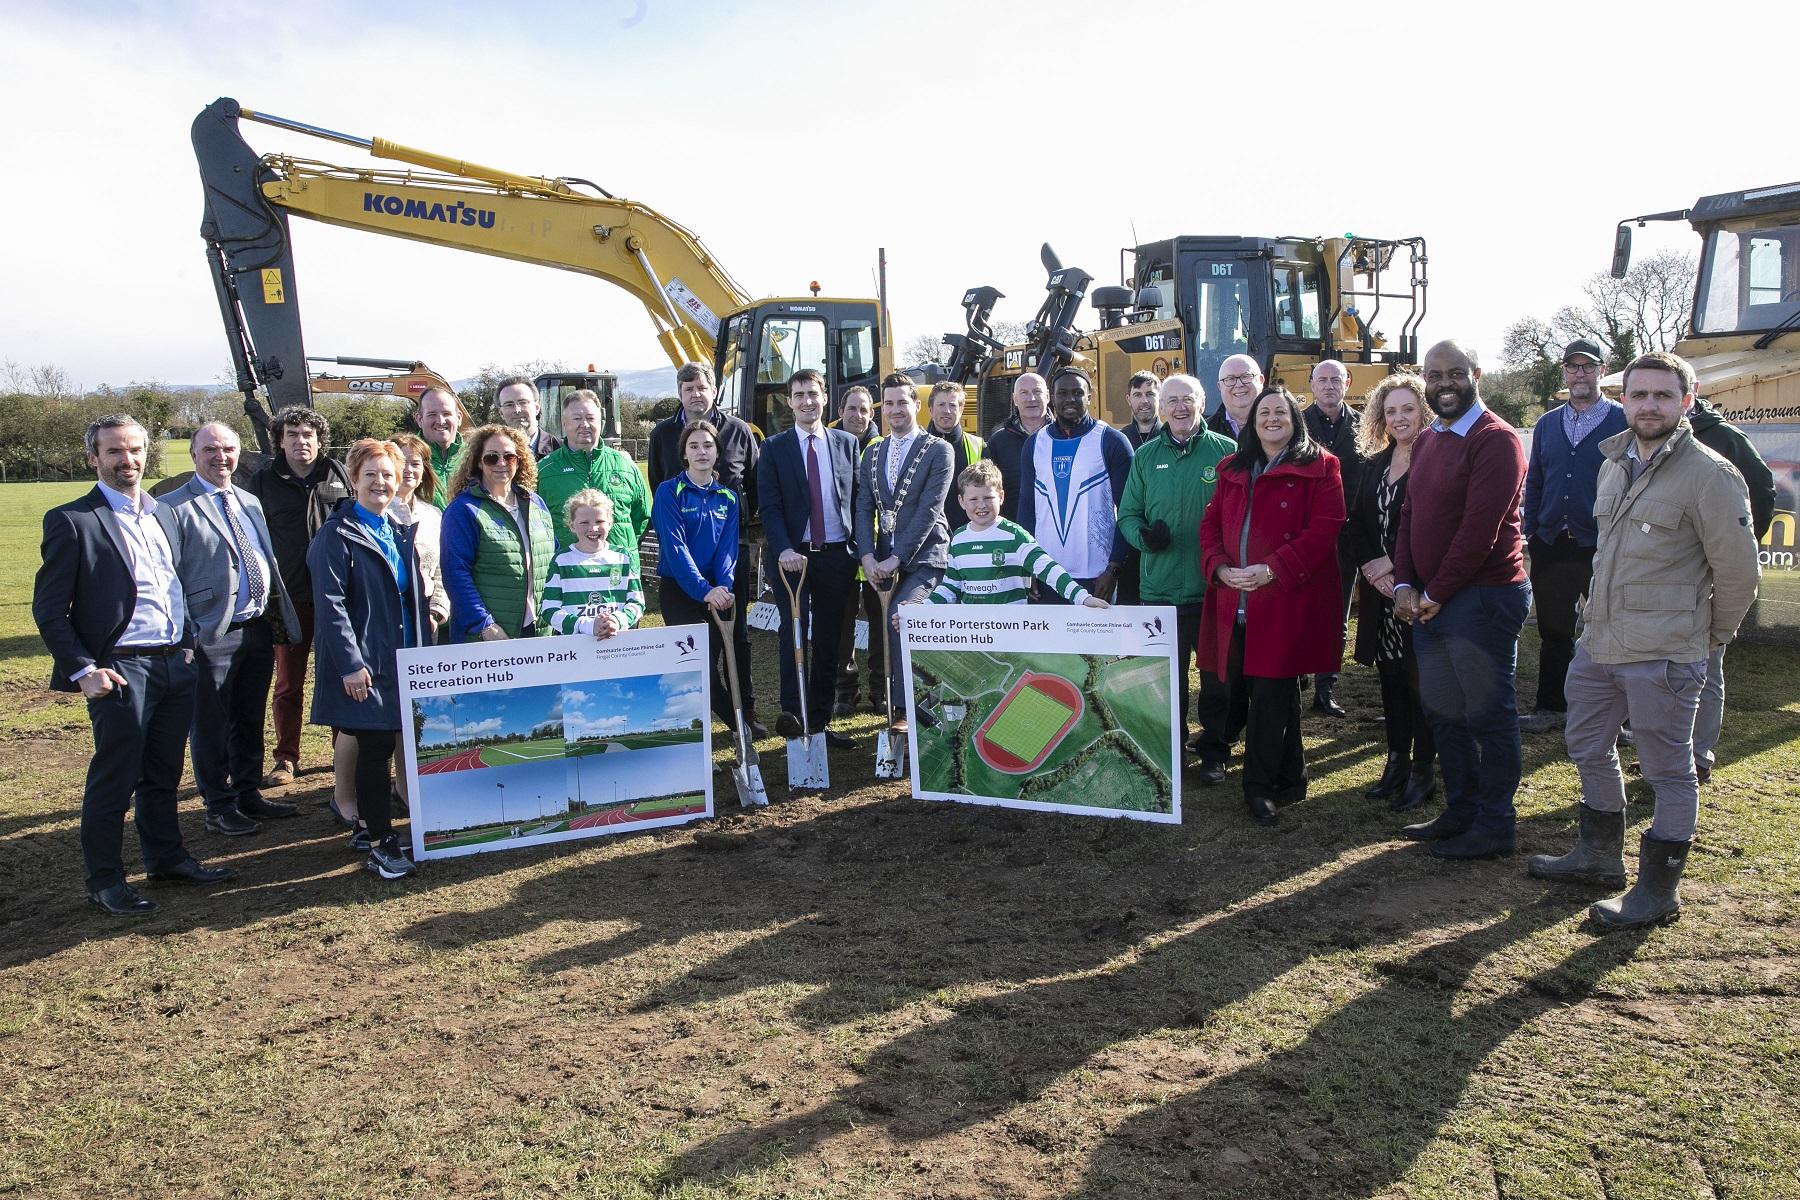 The Minister for Sport joined local teams and councillors to turn the first sod